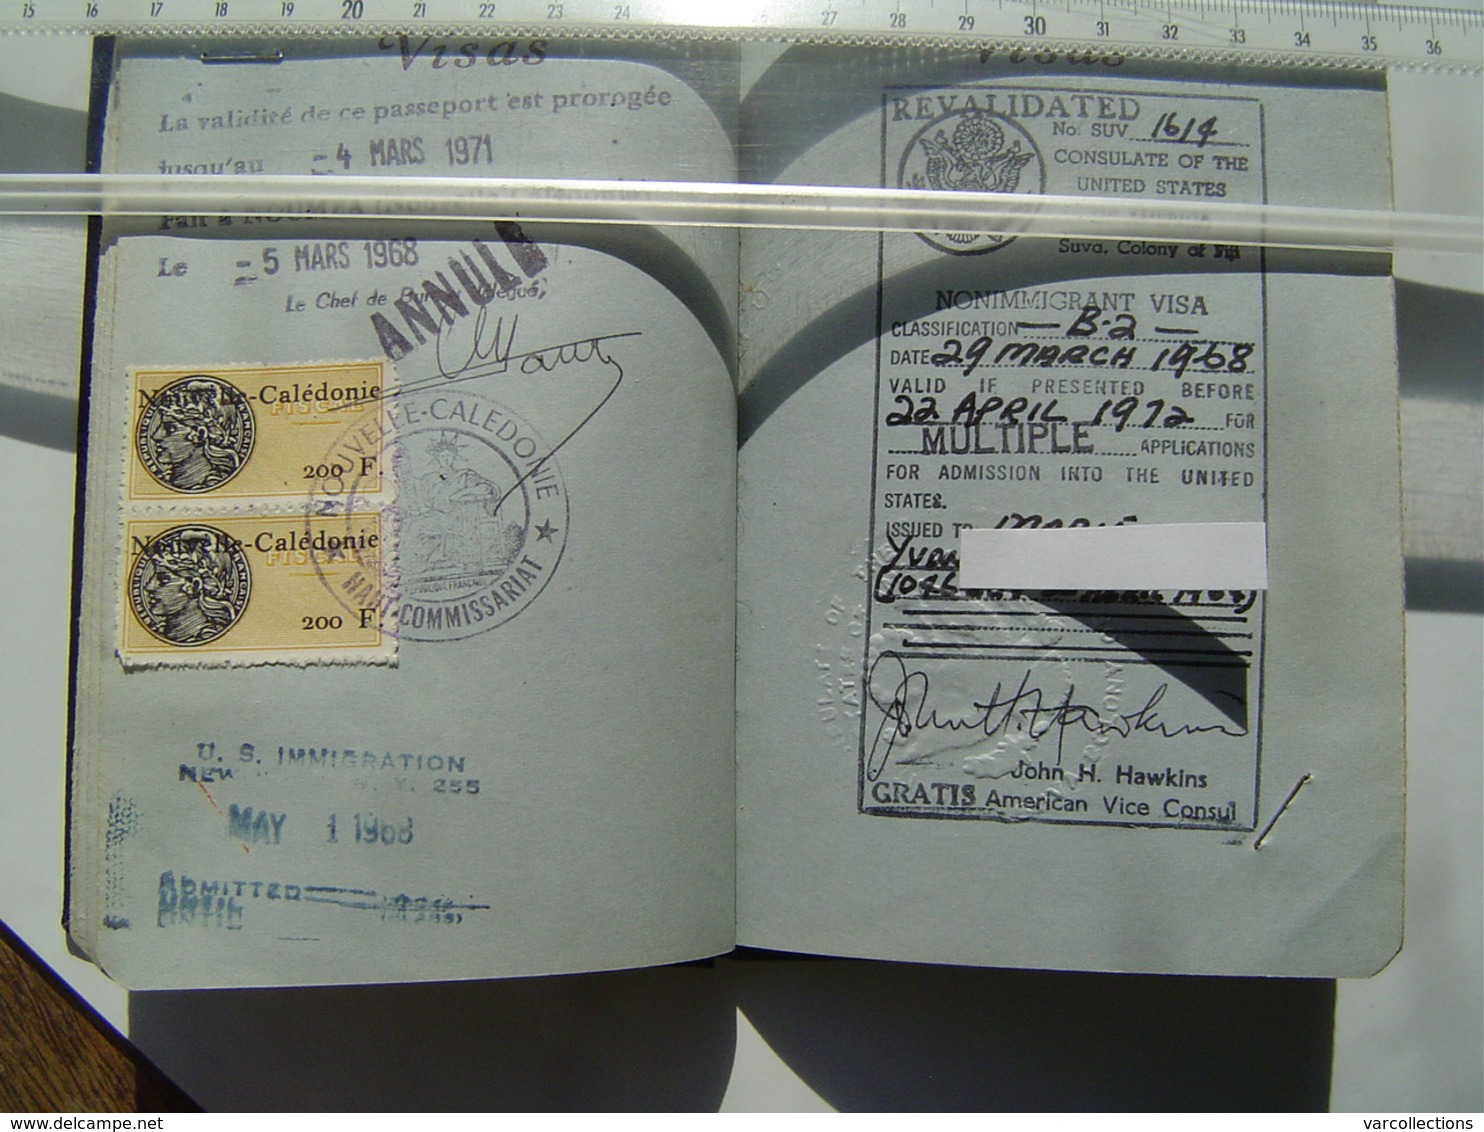 PASSEPORT 1962 : PAPEETE / TAHITI / OCEANIE ( FRANCE ) Cachets & Timbre Taxe Sejour & Fiscal 32 Francs - Historical Documents